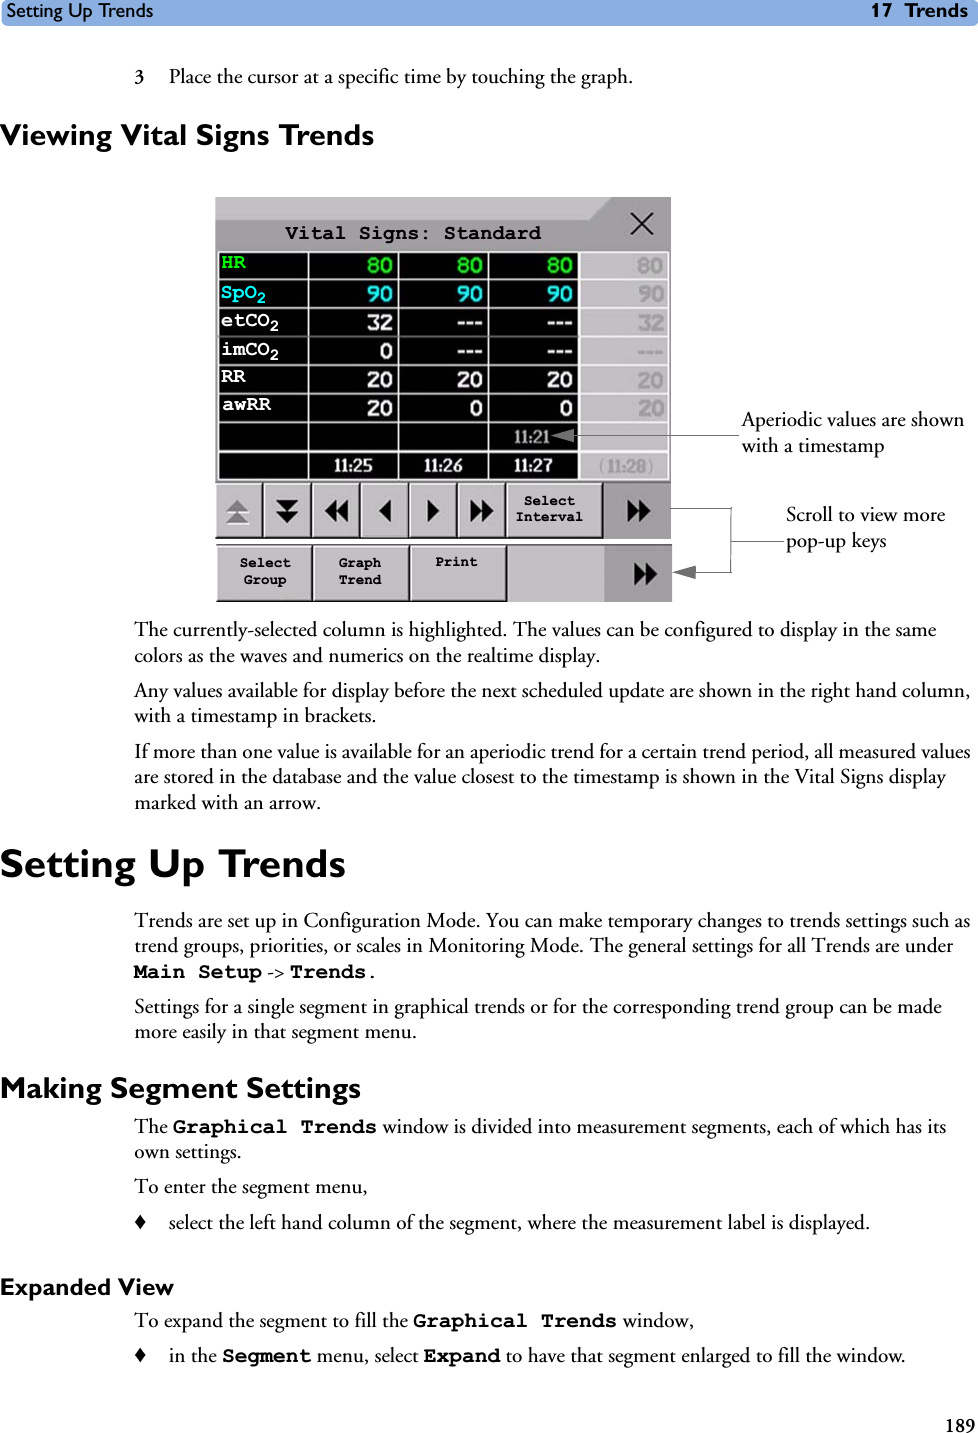 Setting Up Trends 17 Trends1893Place the cursor at a specific time by touching the graph.Viewing Vital Signs TrendsThe currently-selected column is highlighted. The values can be configured to display in the same colors as the waves and numerics on the realtime display.Any values available for display before the next scheduled update are shown in the right hand column, with a timestamp in brackets.If more than one value is available for an aperiodic trend for a certain trend period, all measured values are stored in the database and the value closest to the timestamp is shown in the Vital Signs display marked with an arrow. Setting Up TrendsTrends are set up in Configuration Mode. You can make temporary changes to trends settings such as trend groups, priorities, or scales in Monitoring Mode. The general settings for all Trends are under Main Setup -&gt; Trends. Settings for a single segment in graphical trends or for the corresponding trend group can be made more easily in that segment menu.Making Segment SettingsThe Graphical Trends window is divided into measurement segments, each of which has its own settings.To enter the segment menu,♦select the left hand column of the segment, where the measurement label is displayed.Expanded ViewTo expand the segment to fill the Graphical Trends window, ♦in the Segment menu, select Expand to have that segment enlarged to fill the window.Vital Signs: StandardHRSpO2etCO2Aperiodic values are shown with a timestampimCO2RRawRRSelect GroupGraph TrendPrintSelect Interval Scroll to view more pop-up keys